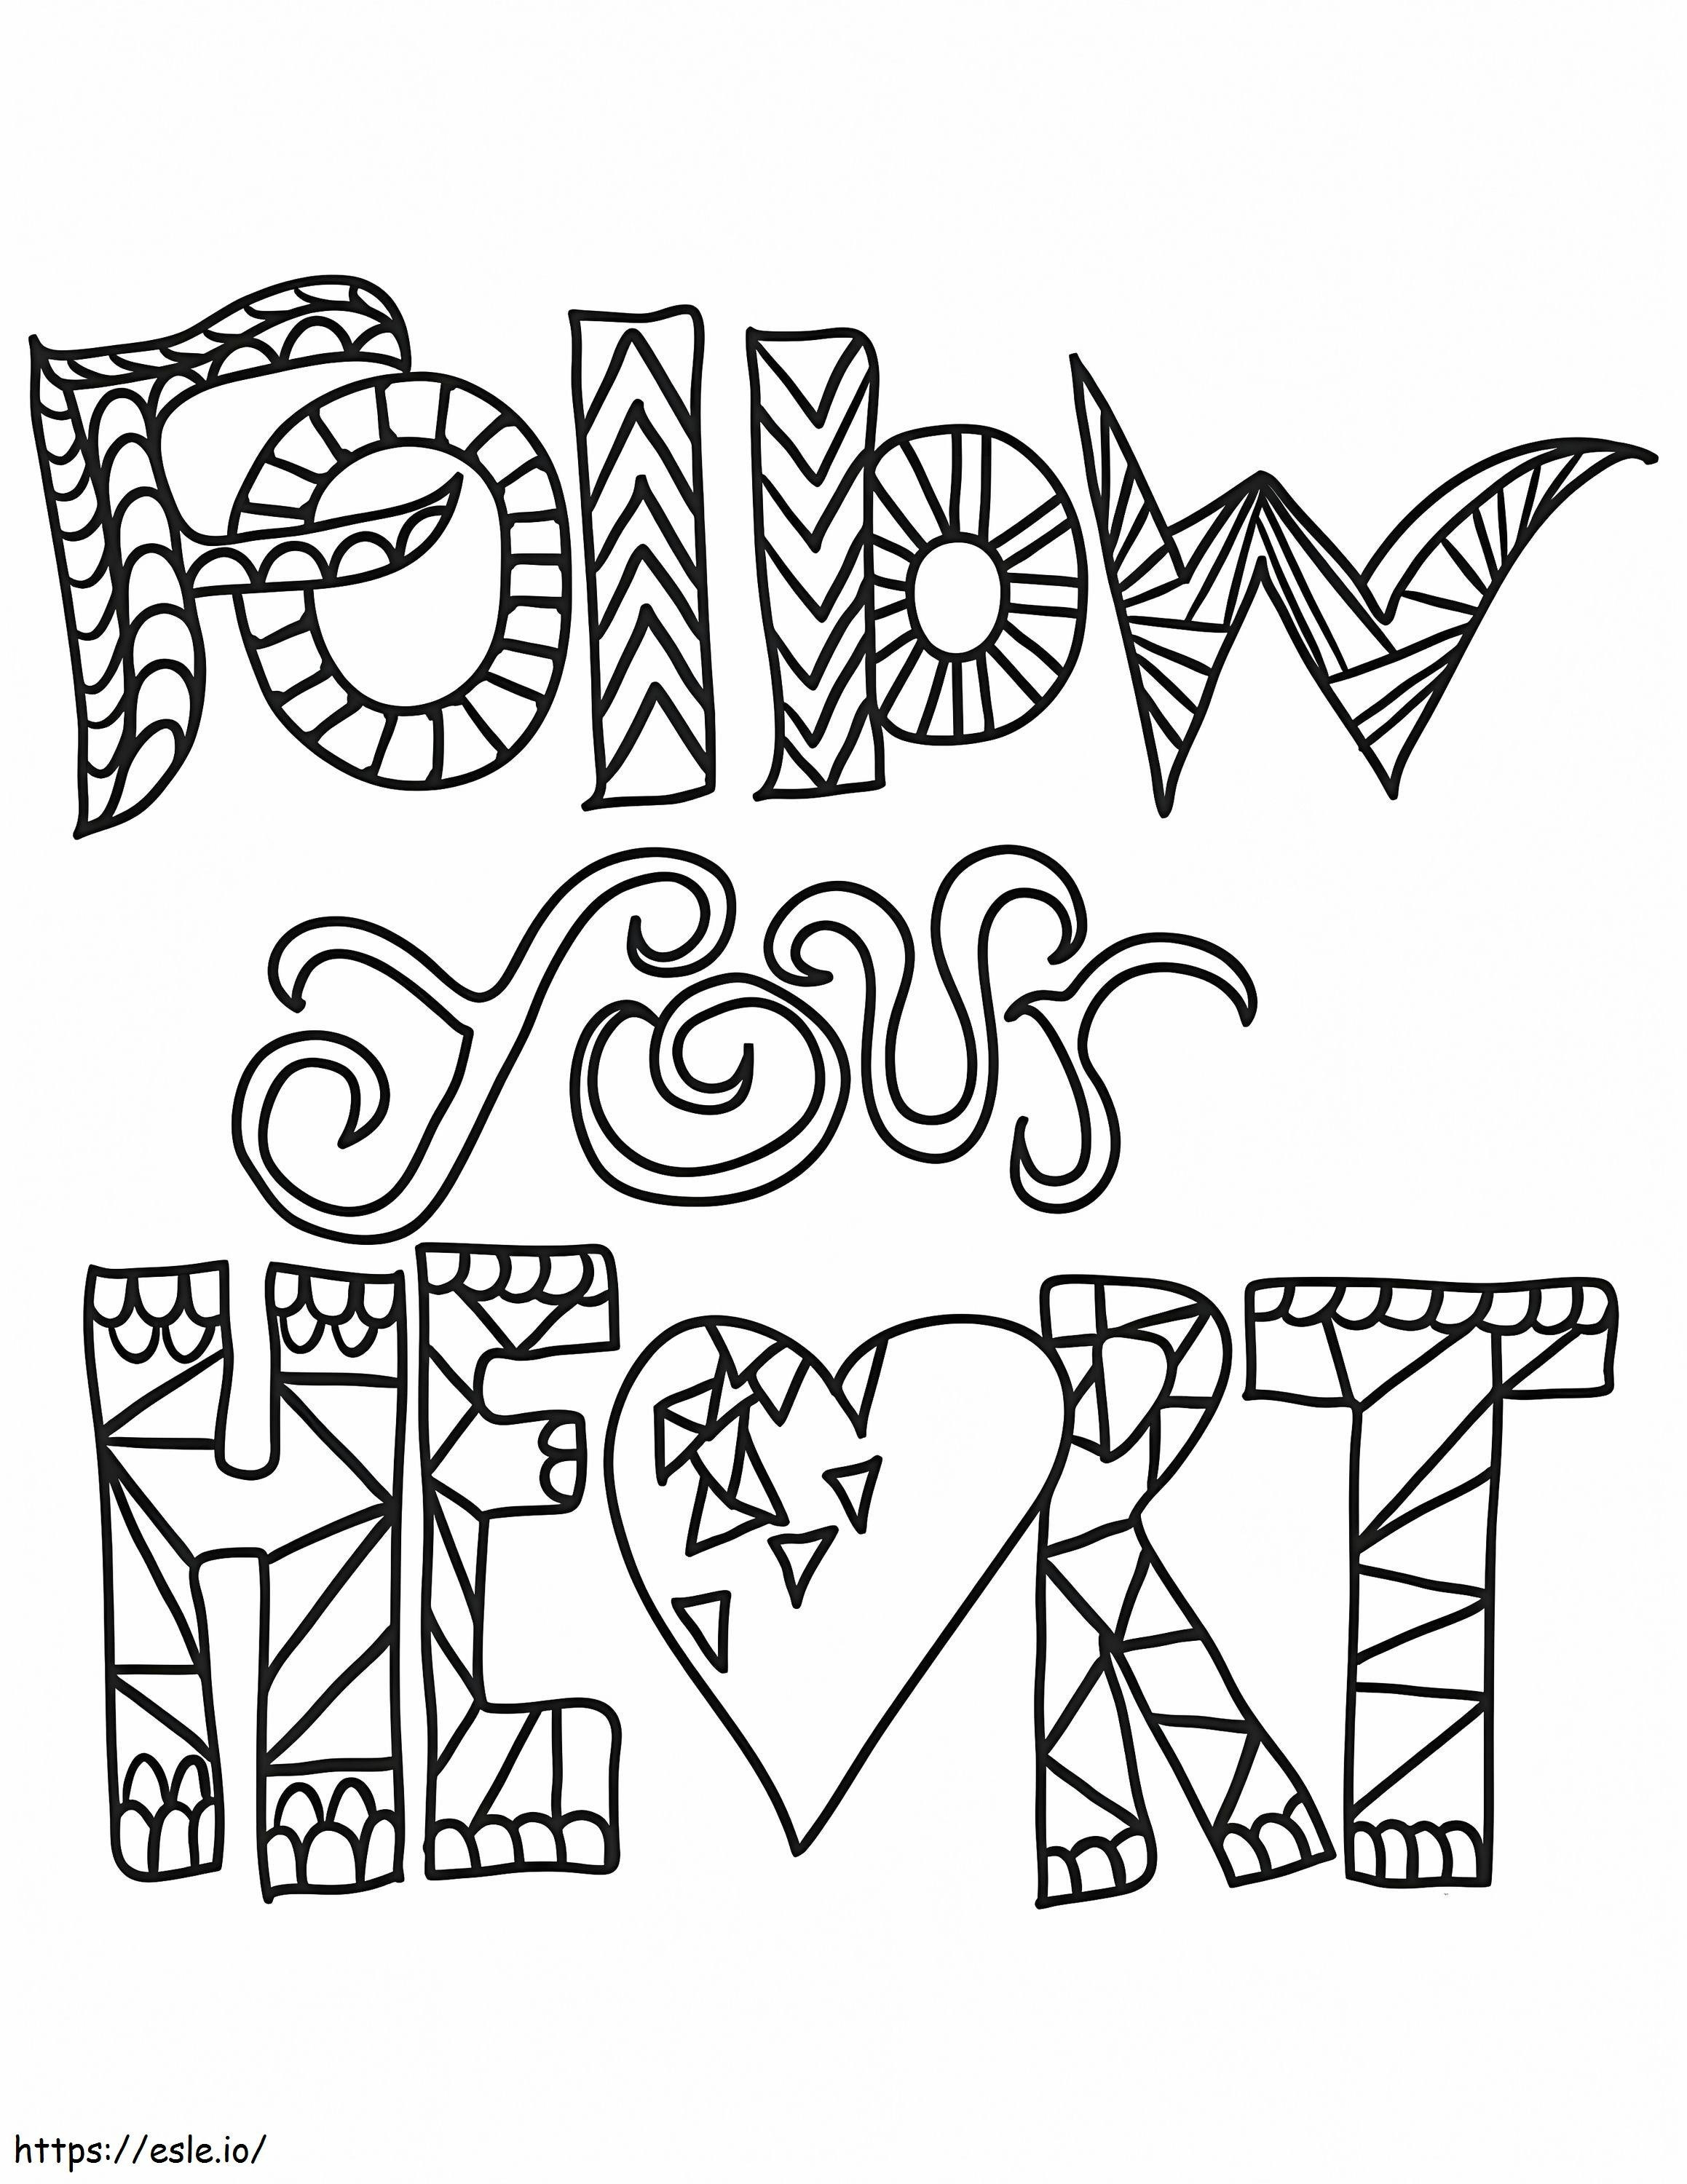 Follow Your Heart coloring page